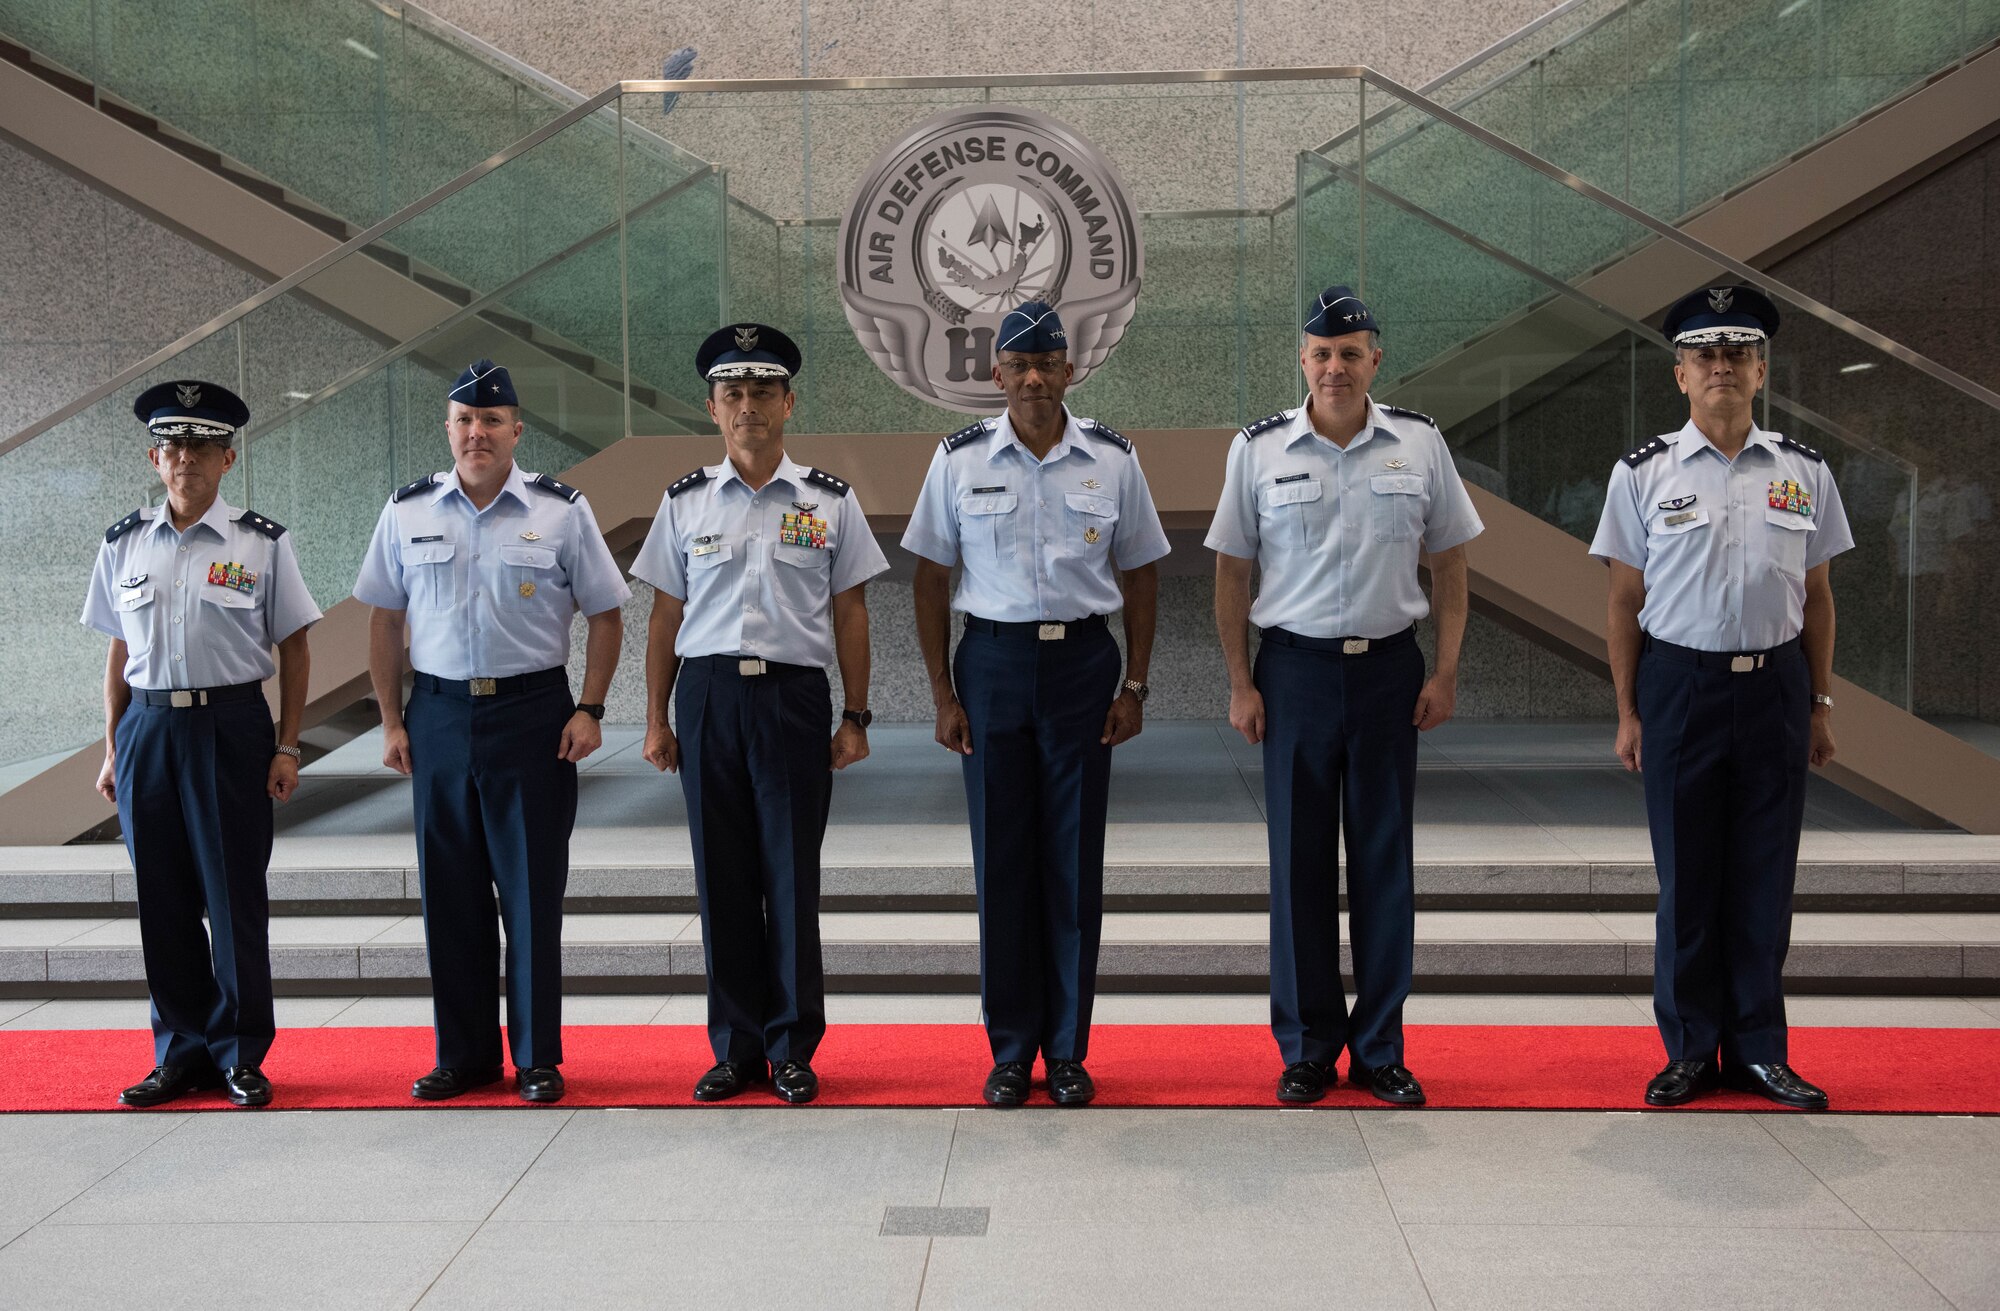 U.S. Air Force from left to right: Brig. Gen. Todd Dozier, Fifth Air Force vice commander, Gen. CQ Brown, Jr.,Pacific Air Forces commander, and Lt. Gen. Jerry Martinez, U.S. Forces Japan and Fifth Air Force commander, pose for a group photo with Lt. Gen. Shigeki Muto (center, left), Japanese Air Defense Command (ADC) commander and members of his staff at ADC headquarters at Yokota Air Base, Japan, Aug. 6, 2018. Brown visited the country to affirm the United States' shared commitment to a free and open Indo-Pacific as well as to seek opportunities to enhance cooperation and coordination across the alliance. (U.S. Air Force photo by Staff Sgt. Hailey Haux)